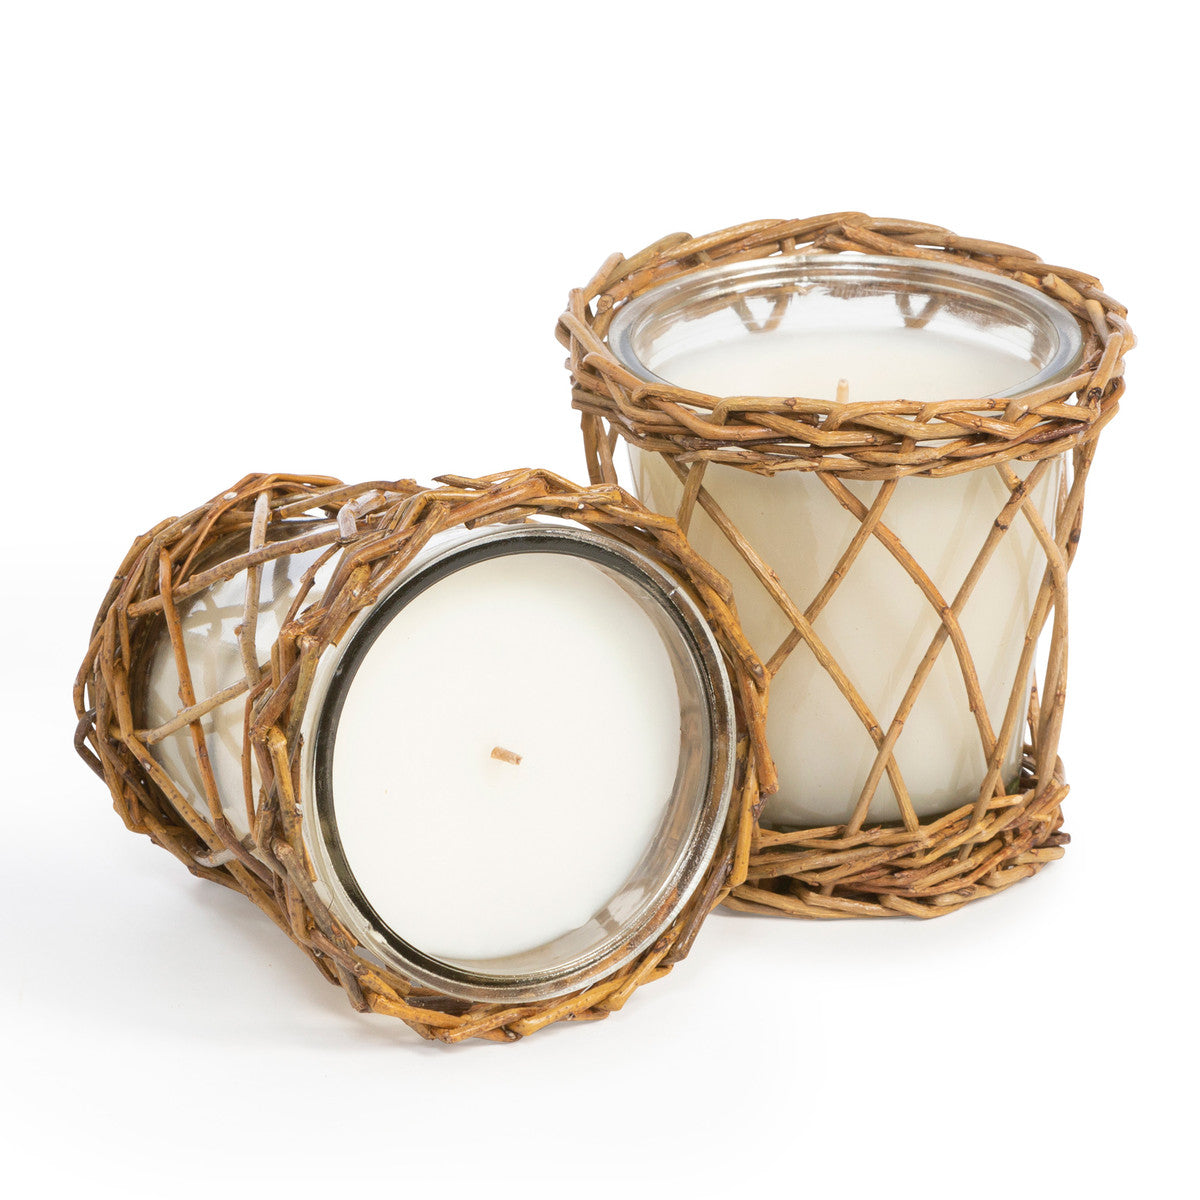 Willow Candle - Autumn Gatherings